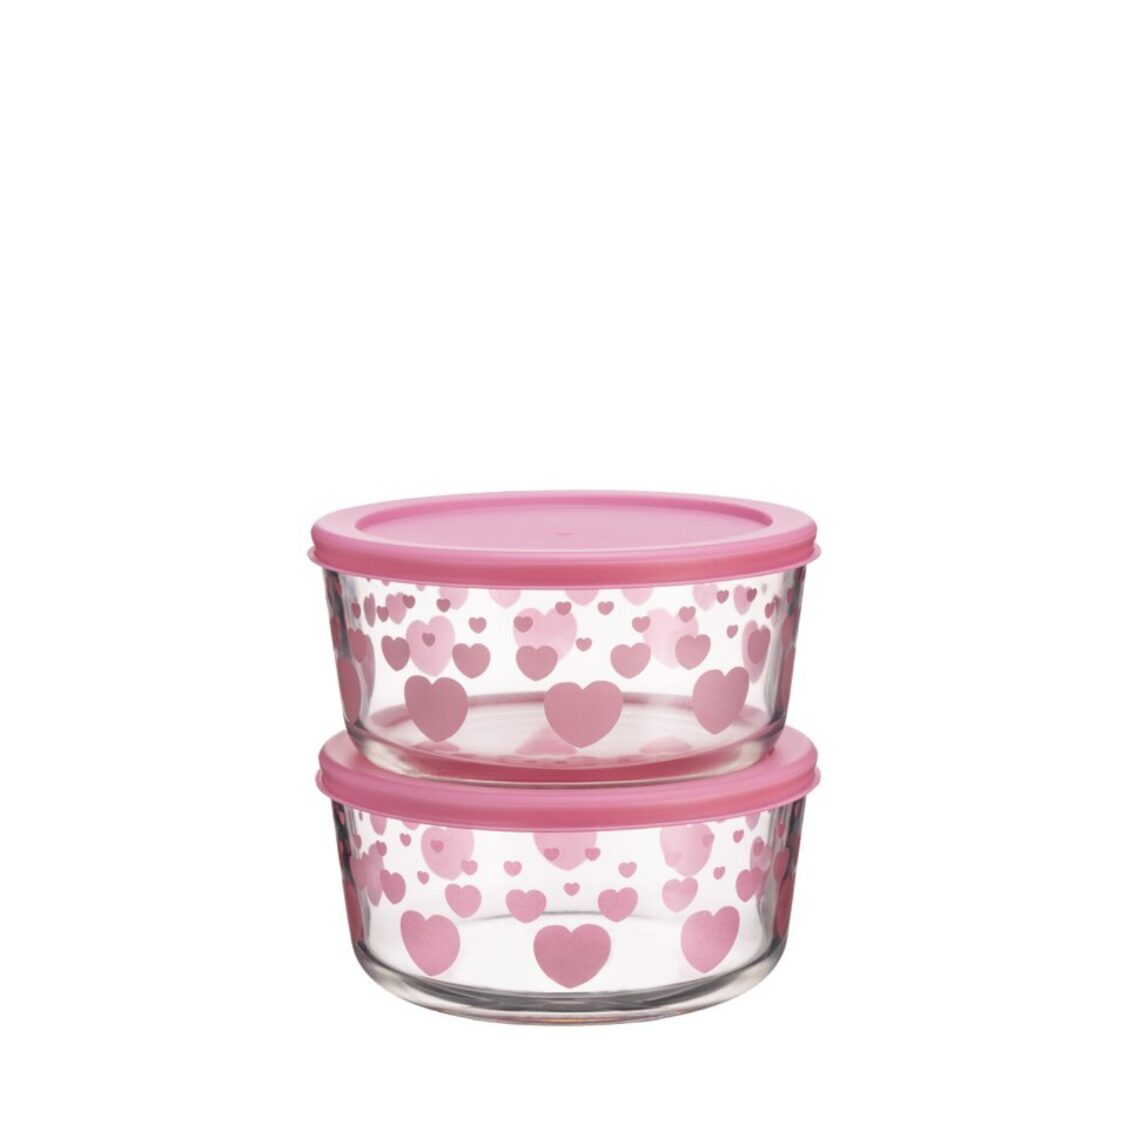 https://media.metro.sg/ProductImages/69bbe14f-1e8d-4129-9f3b-805ff2a0bf5e/1/std/metro-exclusive-pyrex-2pc-set-decorated-storage-pink-heart-940ml-x-2-230315085932.jpg